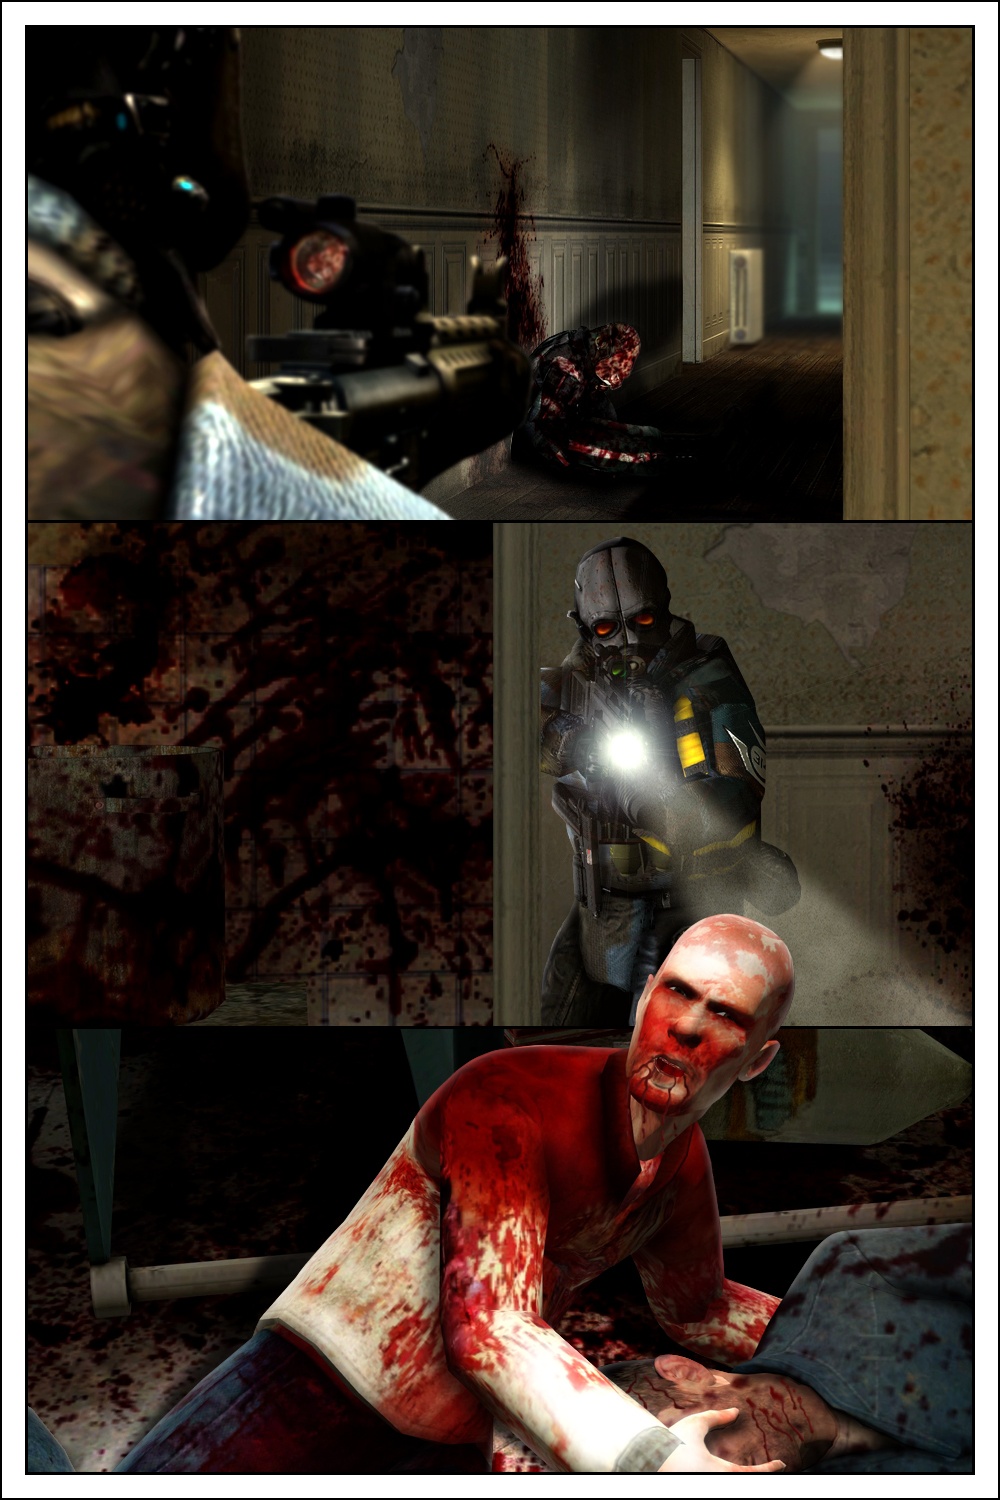 The 314 squad comes across the bloodied corpse of Adams. A soldier checks the room and finds the infected man over a citizen corpse.